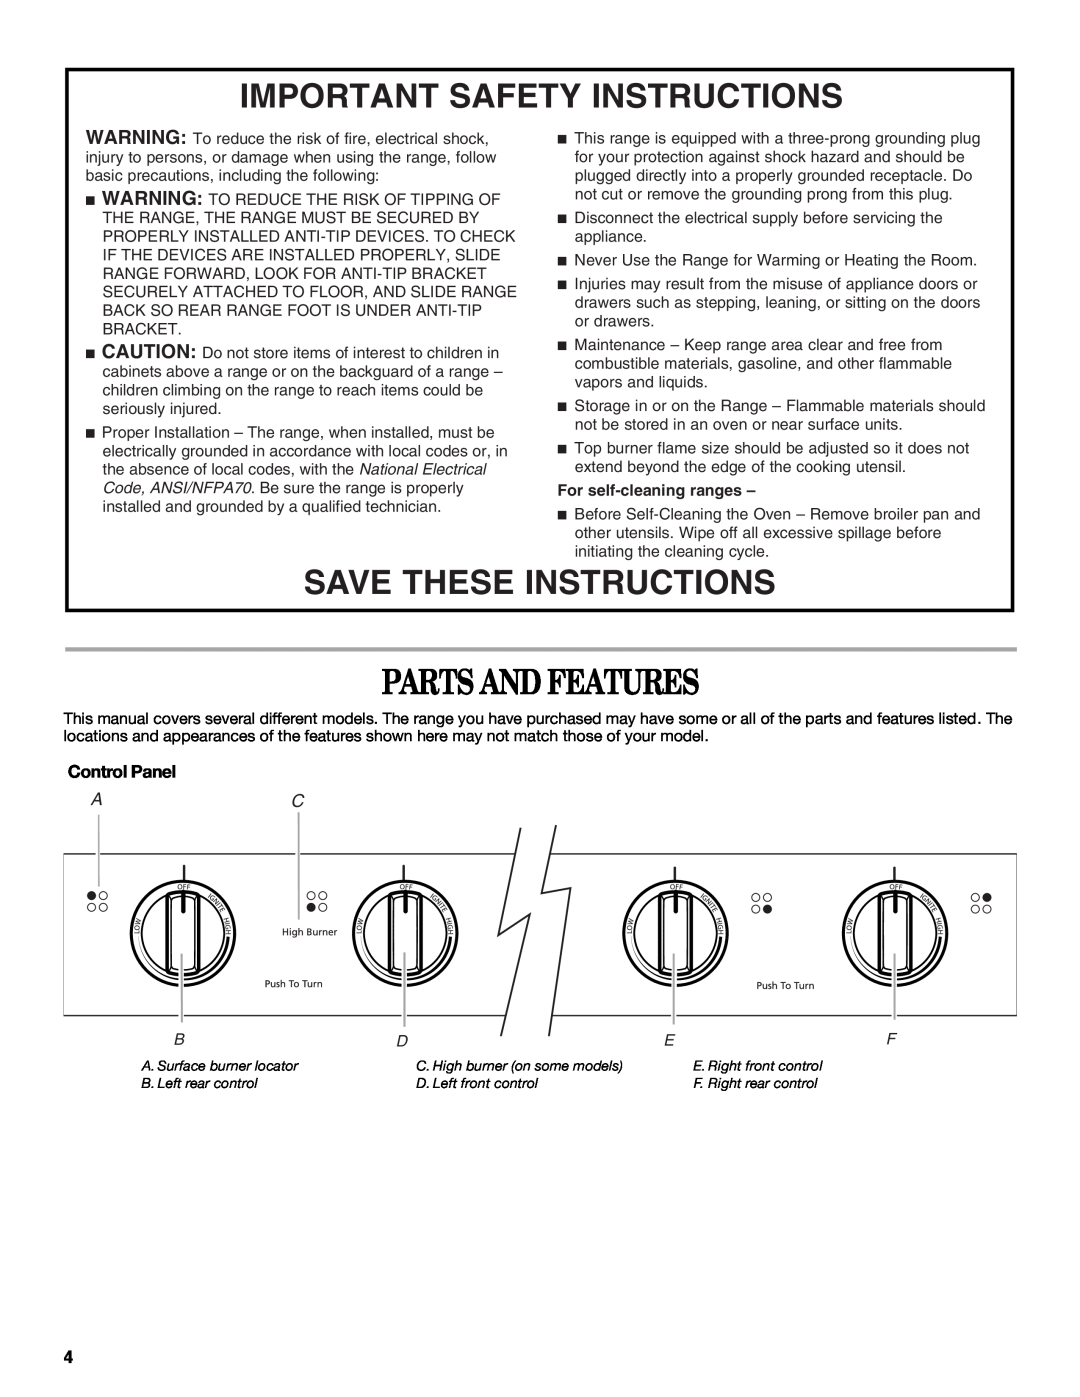 Whirlpool IGS325RQ2 manual Parts And Features, Important Safety Instructions, Save These Instructions, Control Panel 